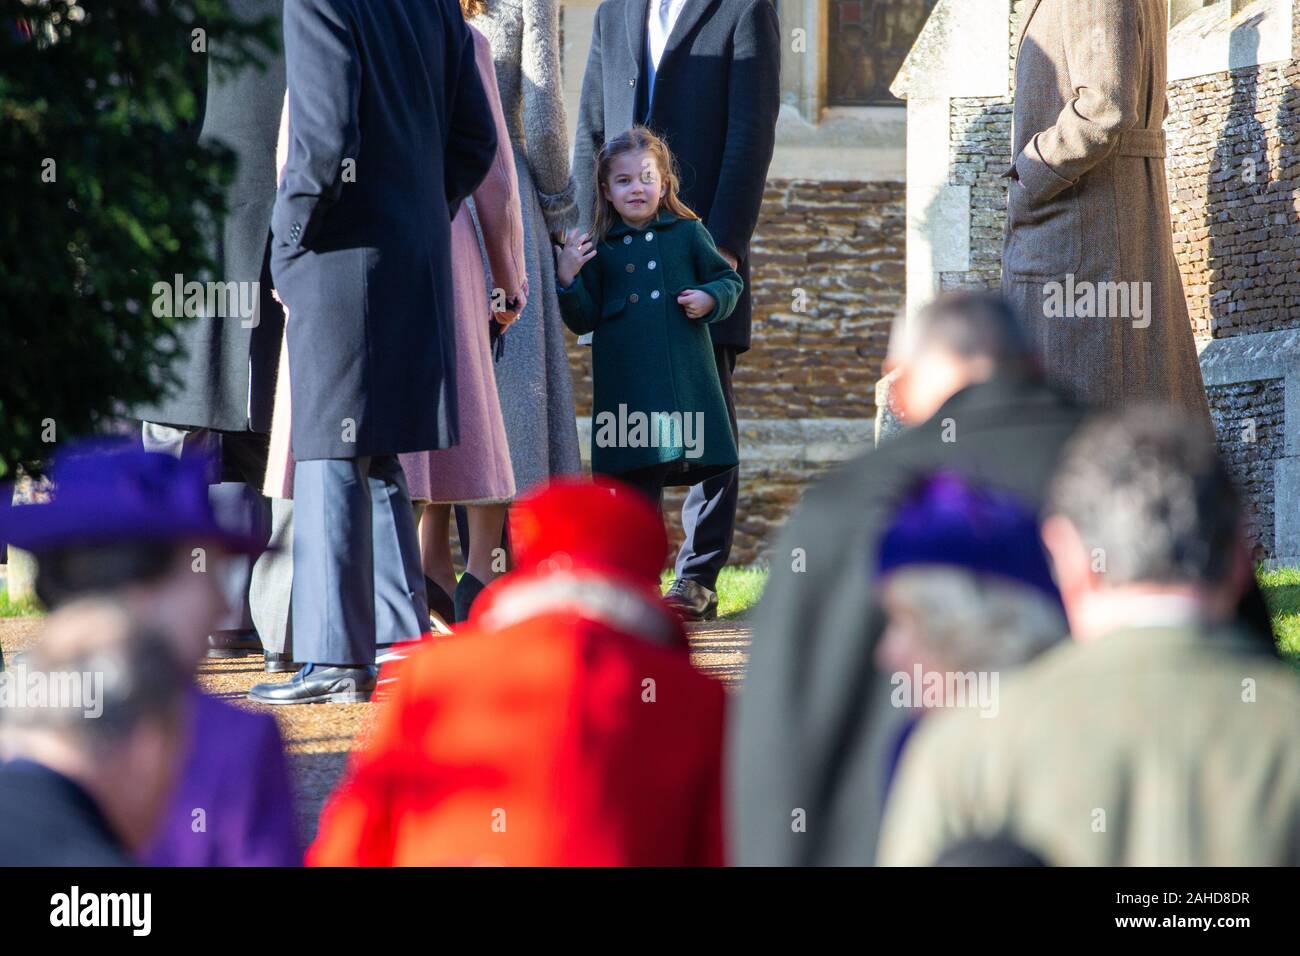 Picture dated December 25th shows Princess Charlotte  watch the Queen arrive at the Christmas Day morning church service at St Mary Magdalene Church in Sandringham, Norfolk.   Prince Andrew kept a low profile as members of the Royal Family attended Christmas Day church services in Sandringham in Norfolk. While a large crowd watched the Queen and family members arrive for the main 11am service, the prince attended an earlier service. Prince Andrew was also absent as family members left the church after the service to greet members of the public. Prince Philip, who was released from hospital on Stock Photo